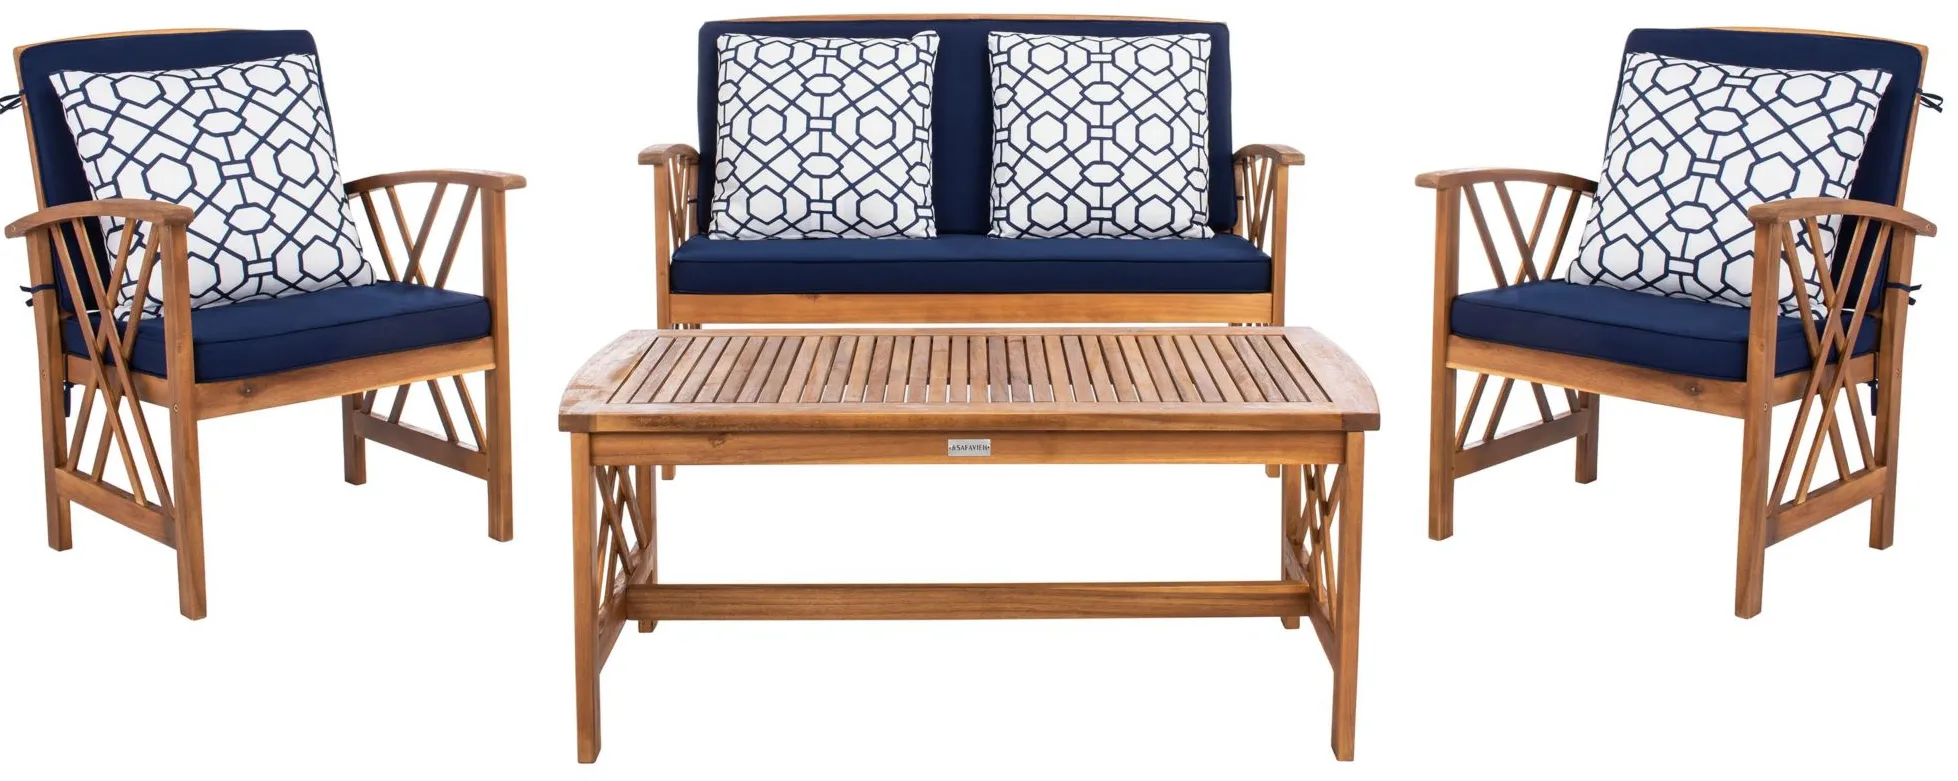 Wrangell 4-pc. Patio Set in Natural/Navy by Safavieh